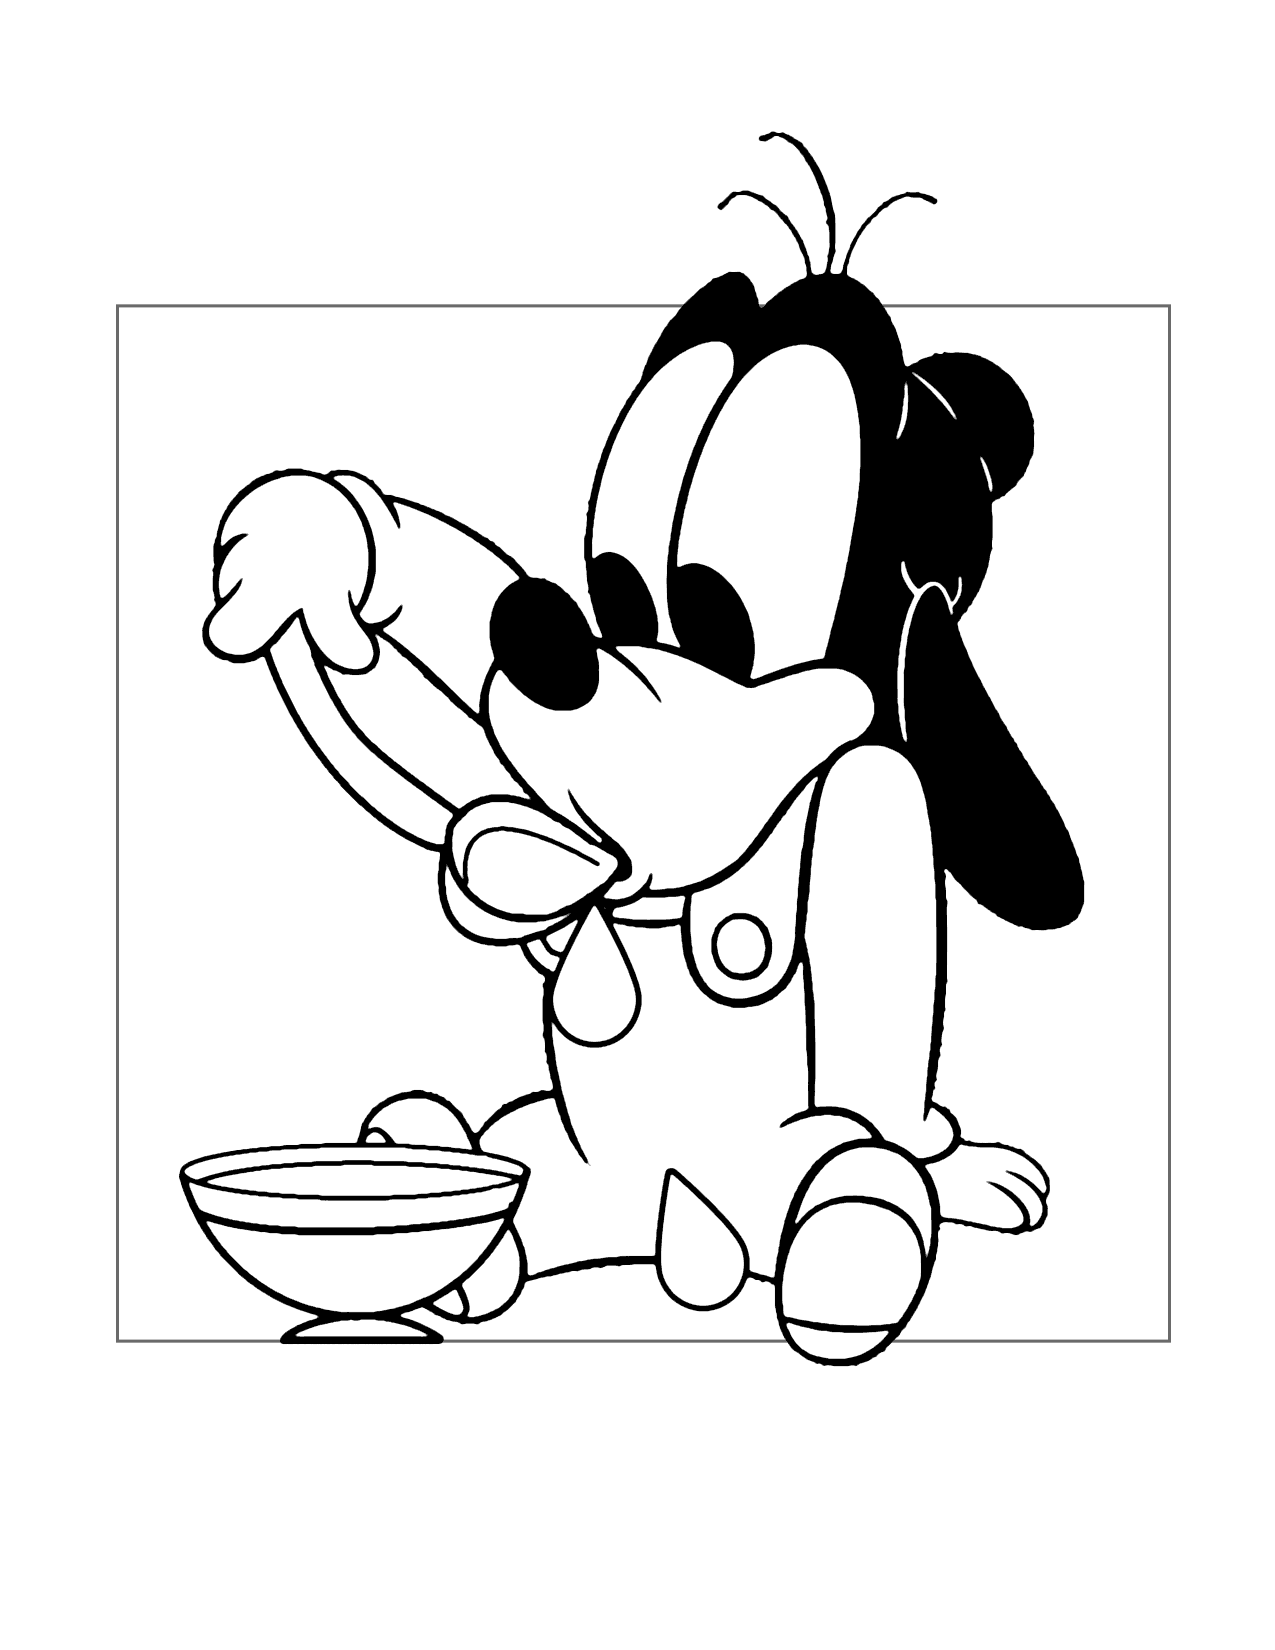 Baby Goofy Eating From A Bowl Coloring Page